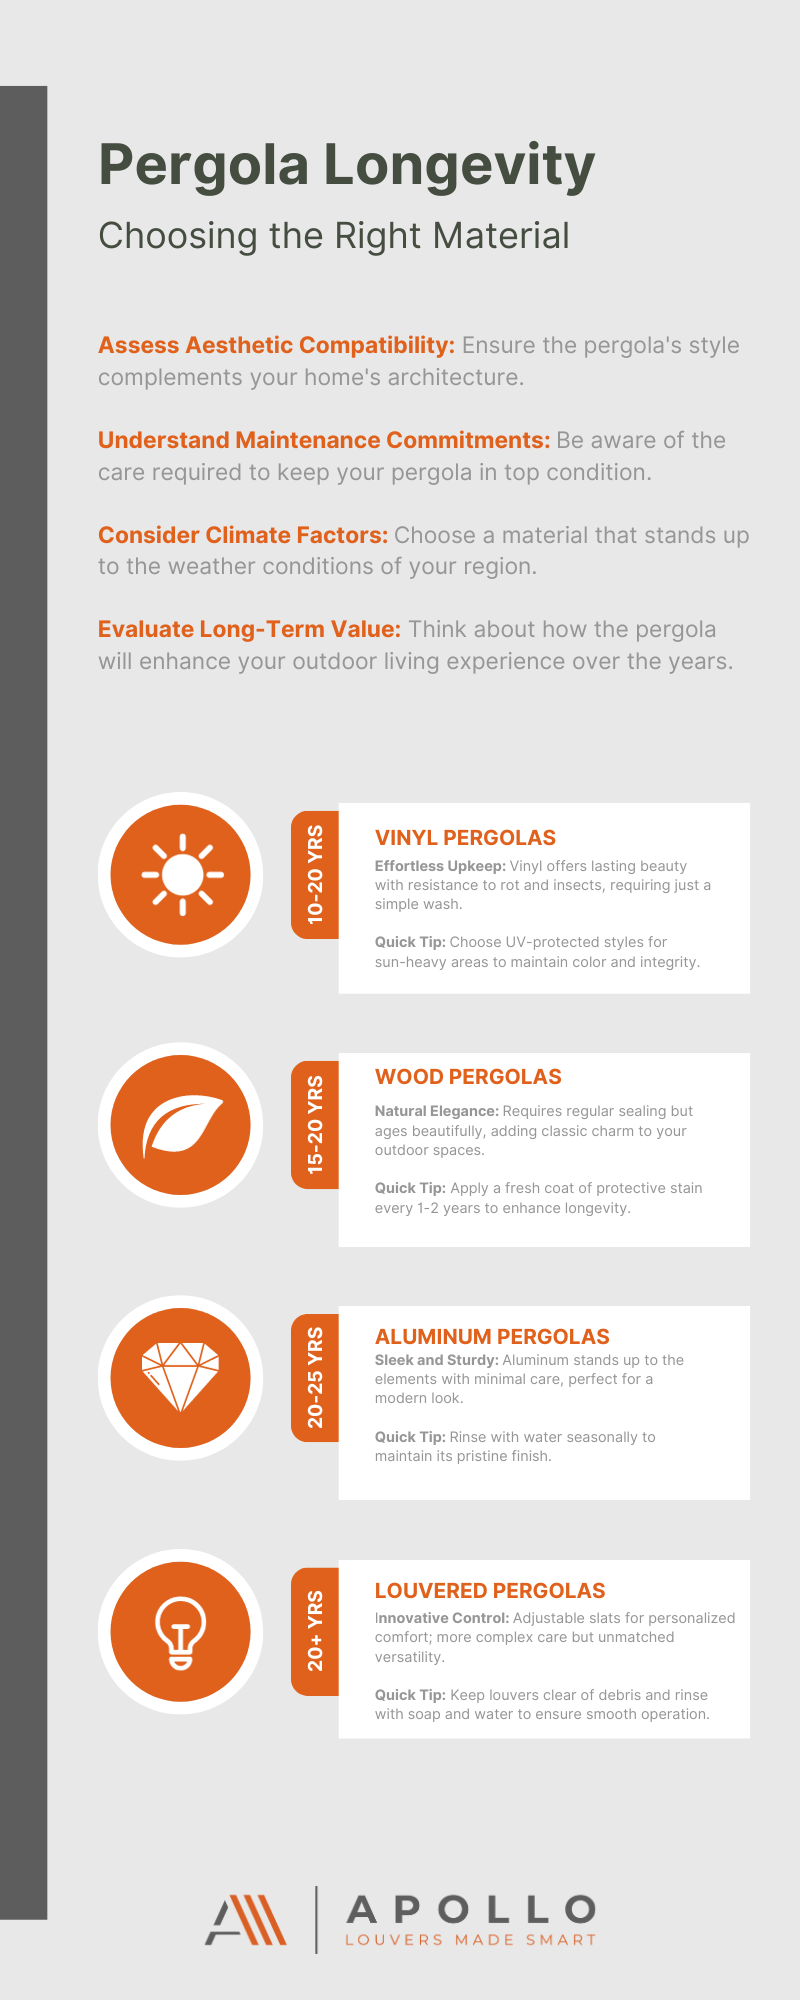 Mobile-friendly infographic detailing pergola material choices with expected longevity and maintenance advice.